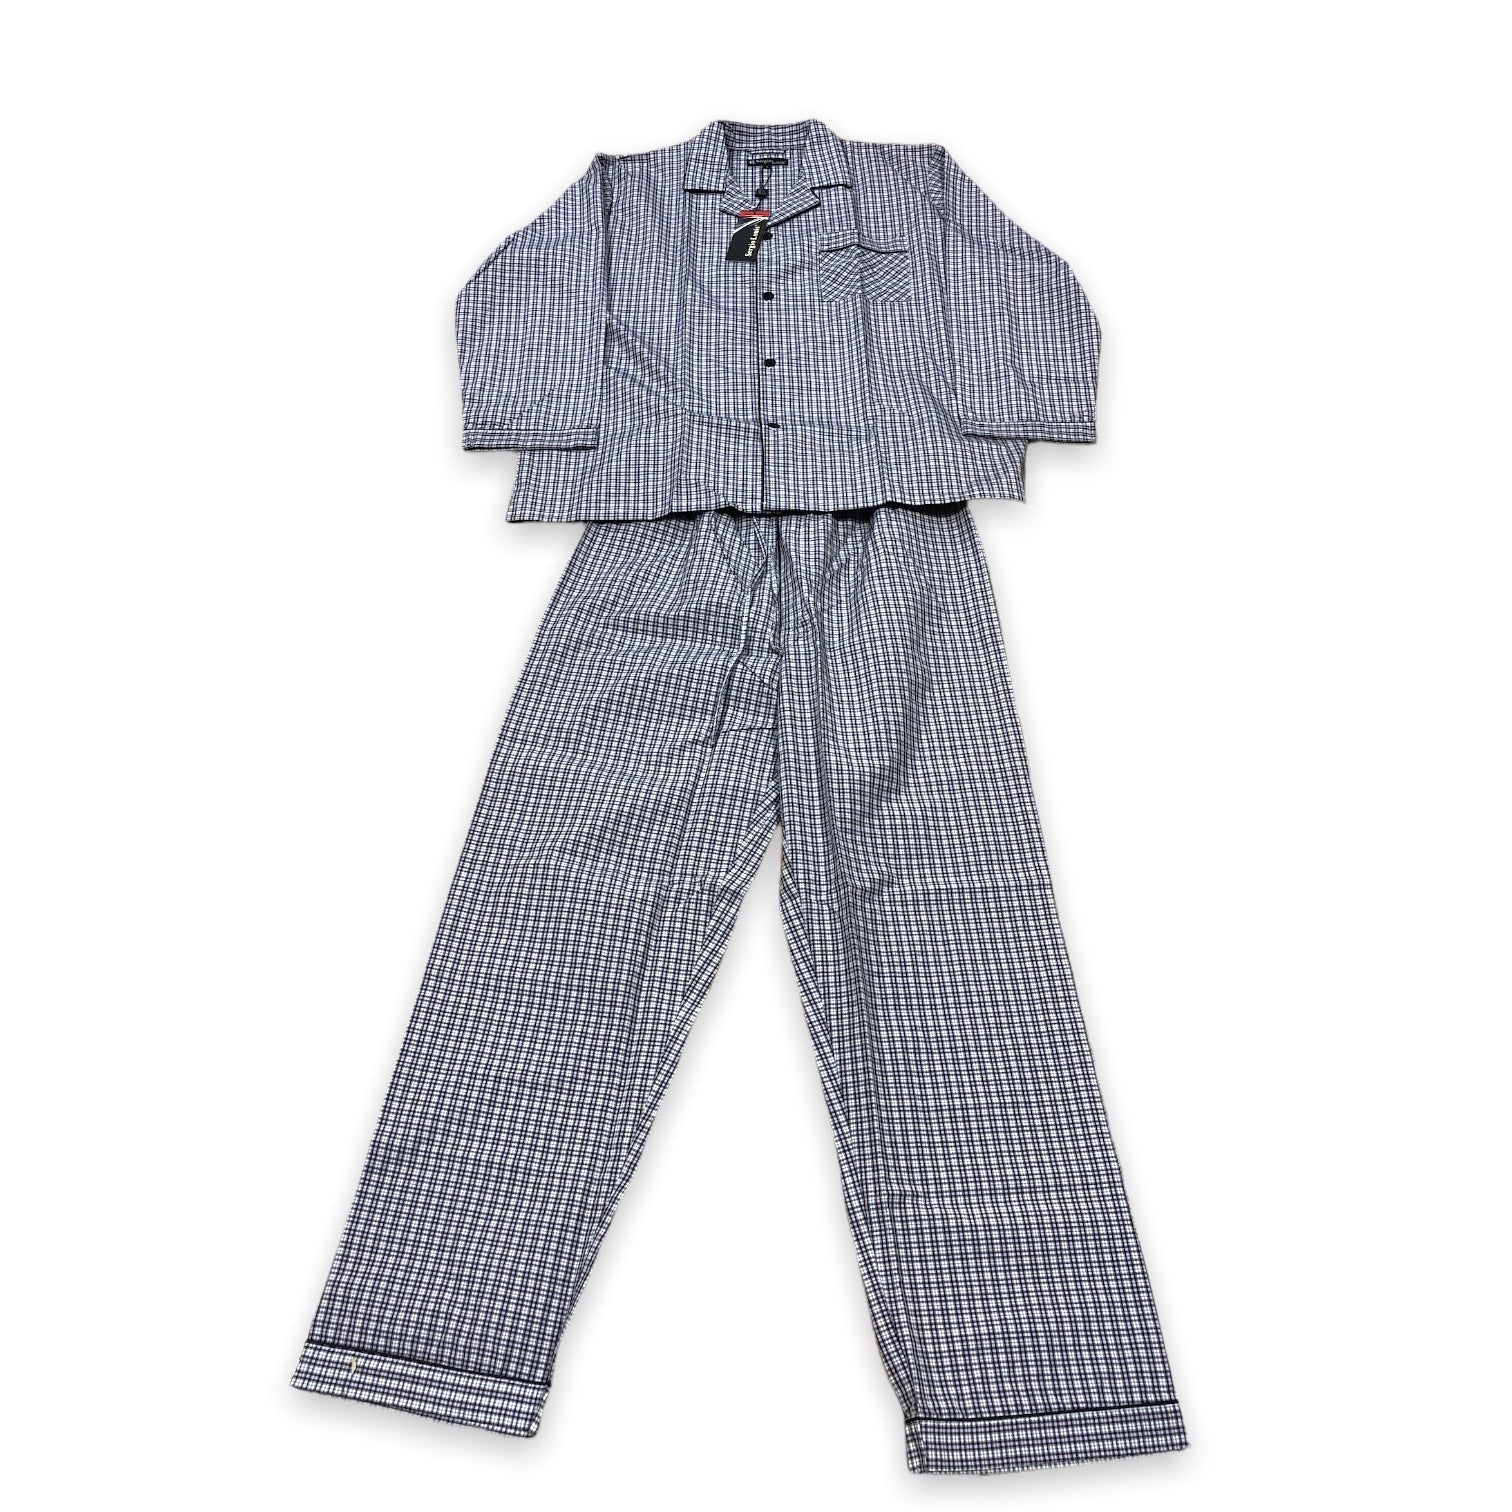 BULK BUY - Men's Two-Piece Poly Cotton Pajama Set with Matching Pants  (8-Pack)